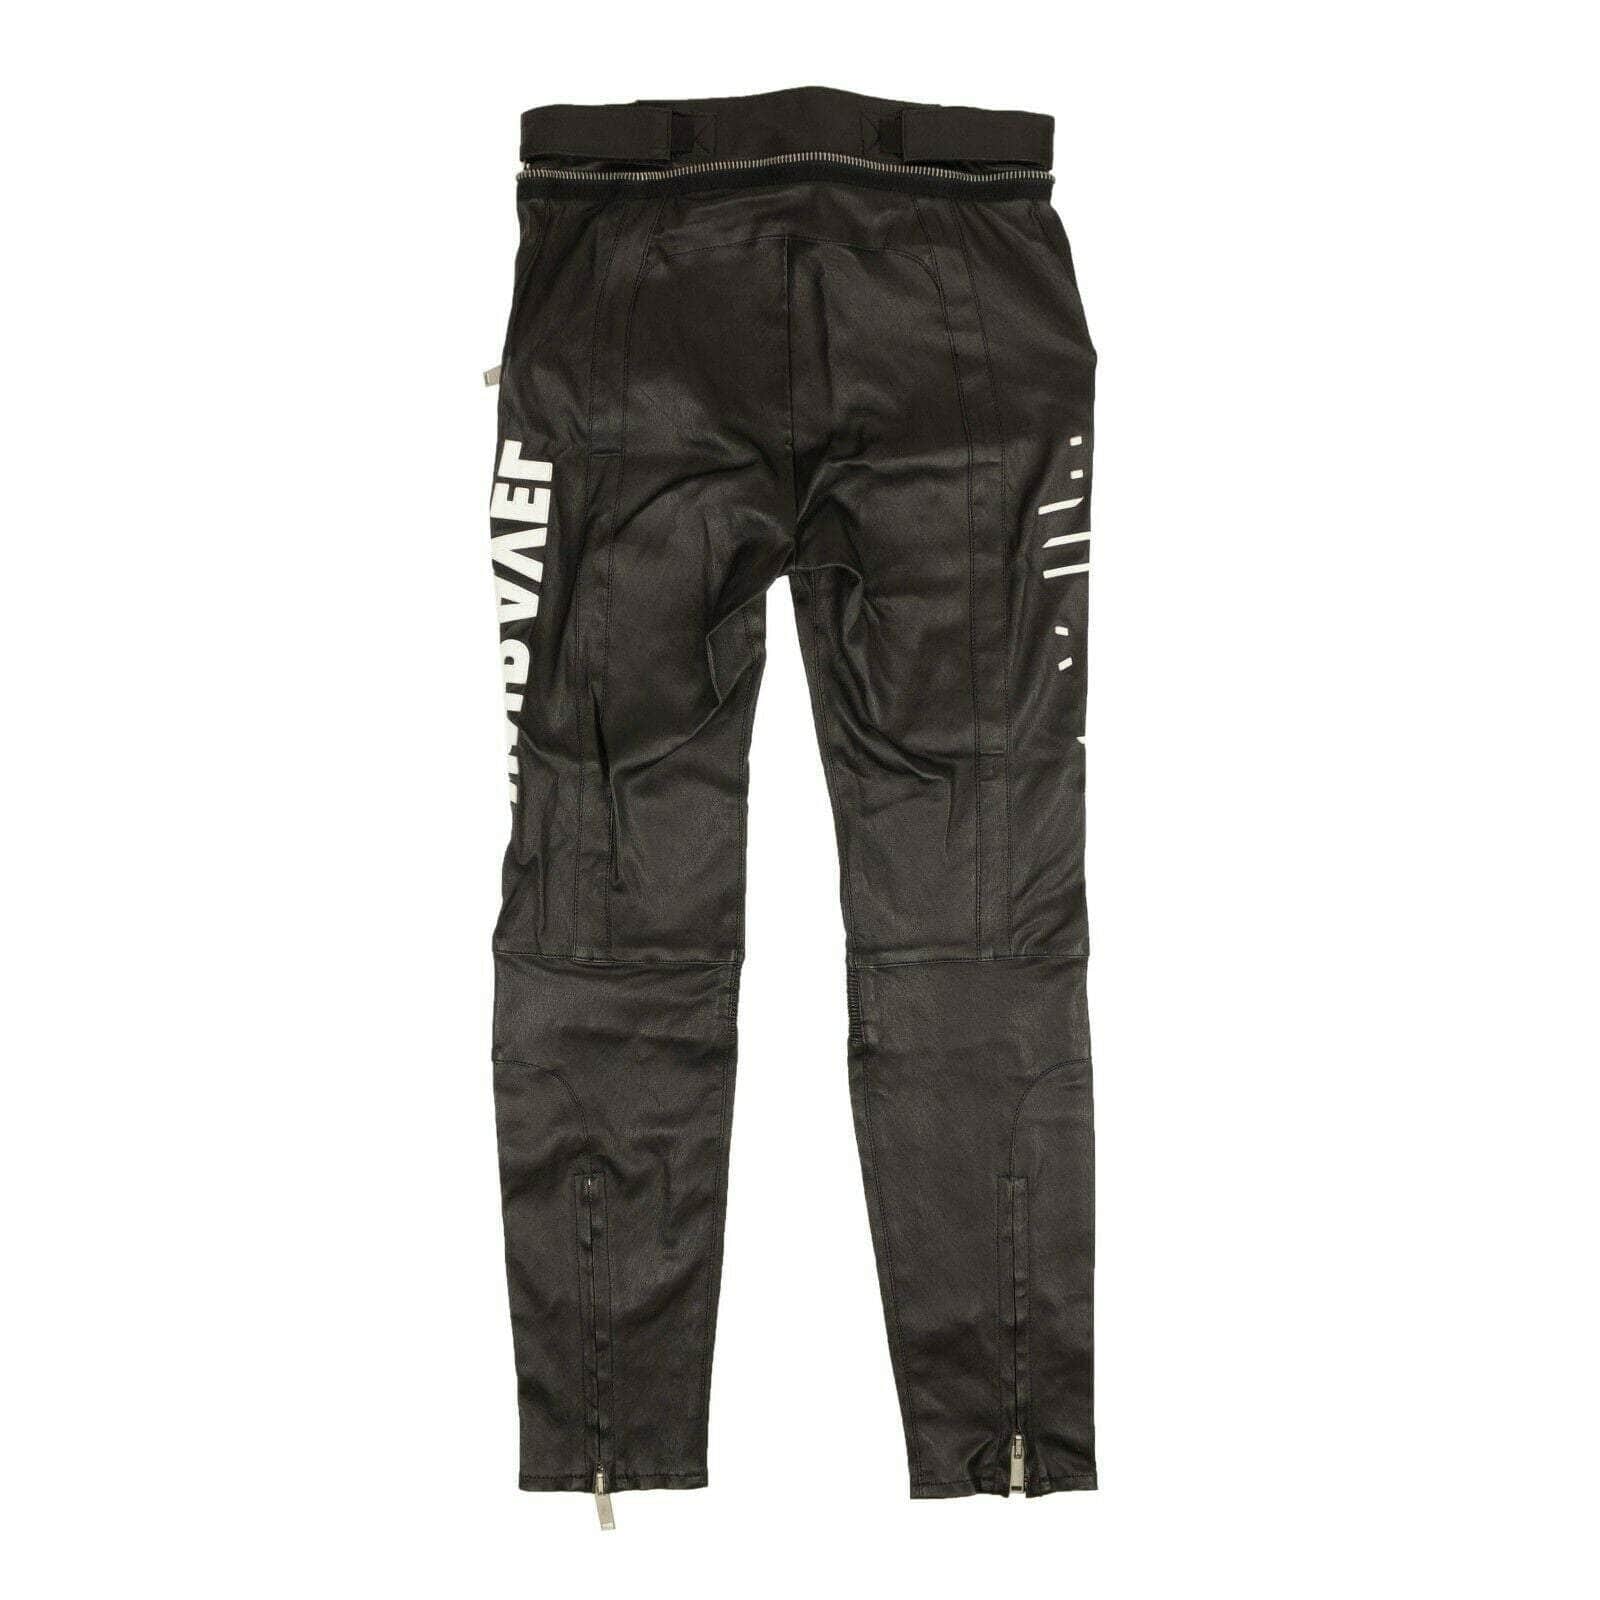 Unravel Project 500-750, channelenable-all, chicmi, couponcollection, gender-womens, main-clothing, size-30, unravel-project 30 Black Leather Logo Skinny Pants 74NGG-UN-1129/30 74NGG-UN-1129/30